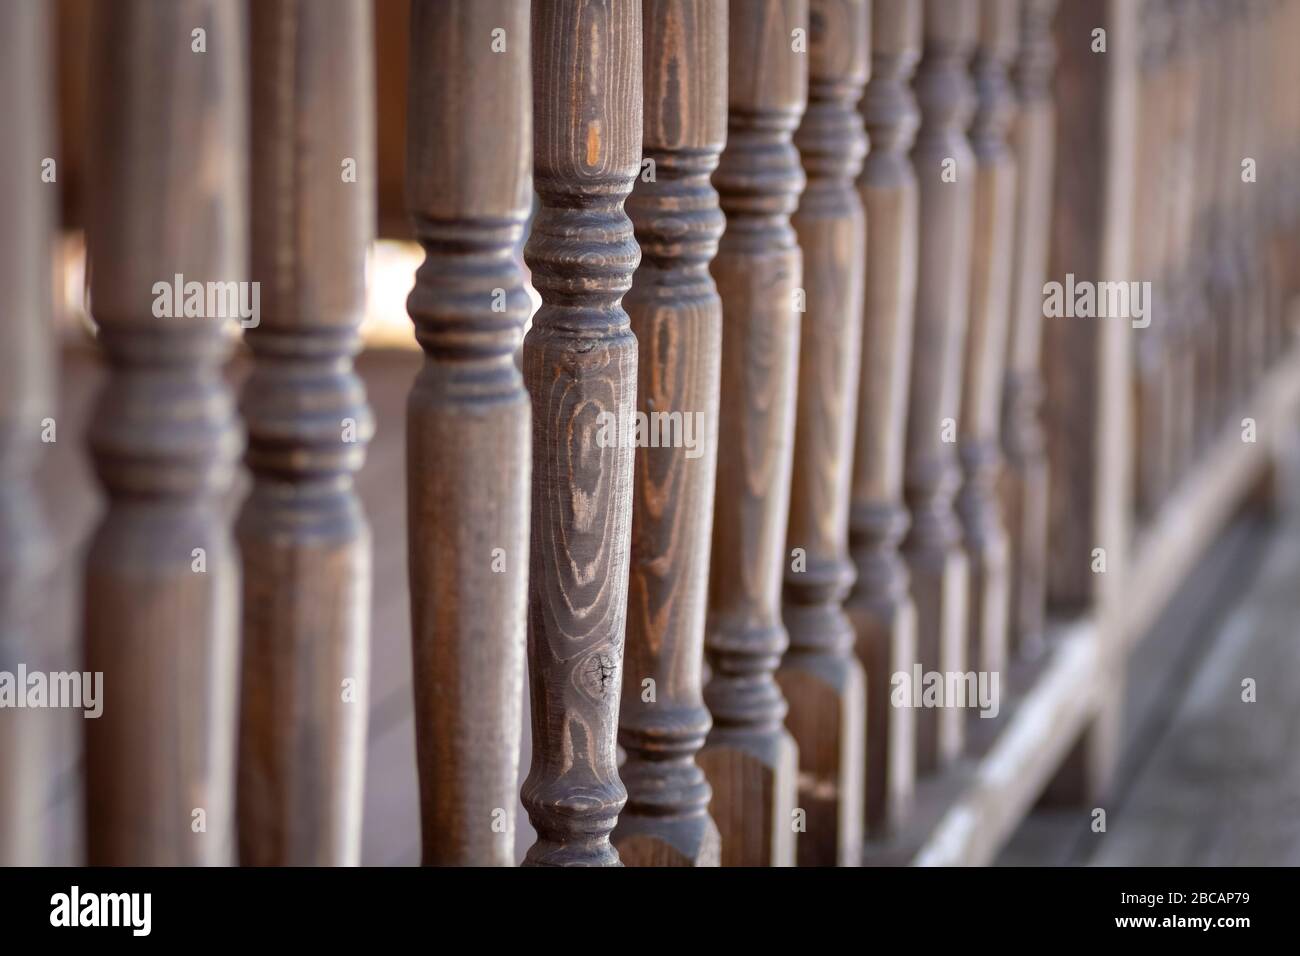 A row of balusters of a wooden veranda. Stock Photo